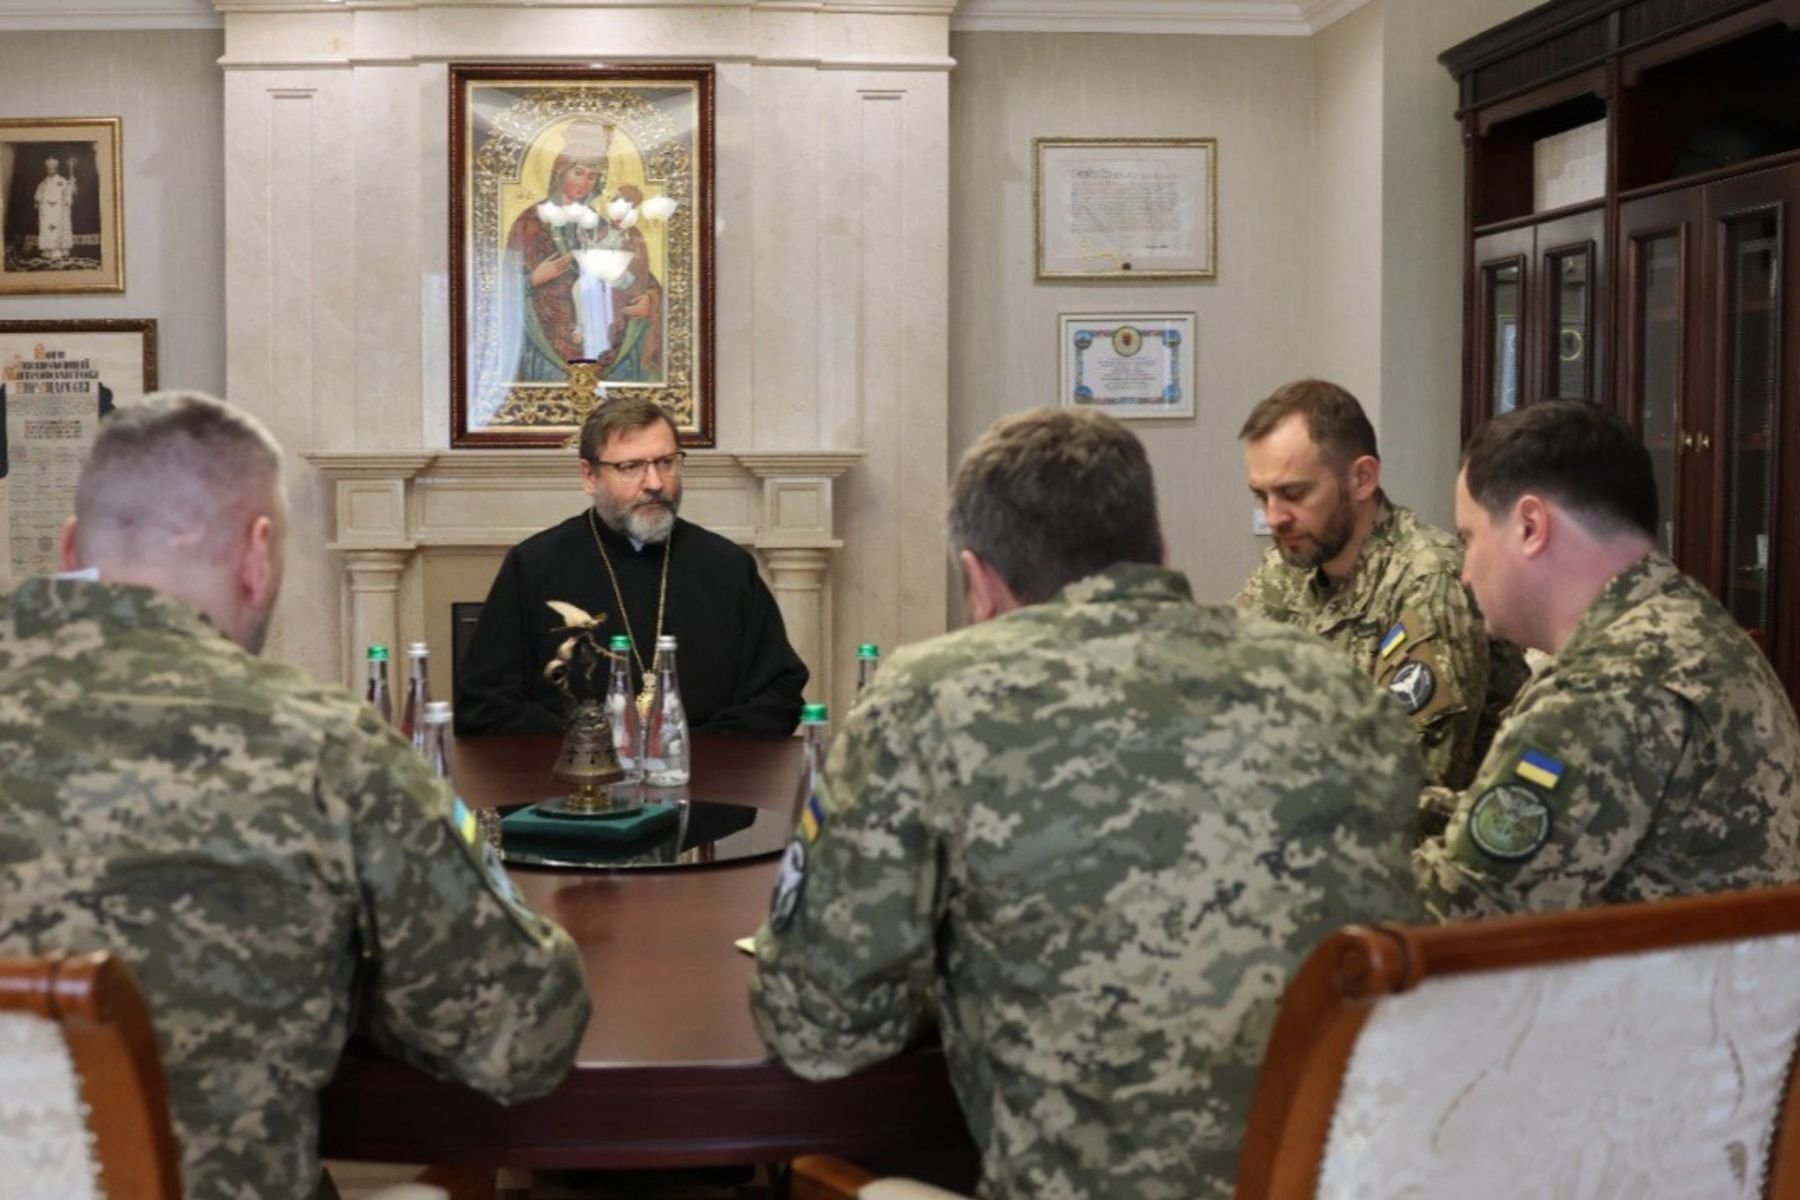 Major Archbishop Sviatoslav Shevchuk of Kyiv-Halych, head of the worldwide Ukrainian Greek Catholic Church, is seen in an April 2024 photograph with members of the Ukrainian military at the Patriarchal Cathedral complex in Kyiv. The major archbishop and the Ukrainian military officials discussed a range of issues, including Russia's detention of two Ukrainian Catholic priests whose fate remains unknown. (OSV News photo/courtesy UGCC)